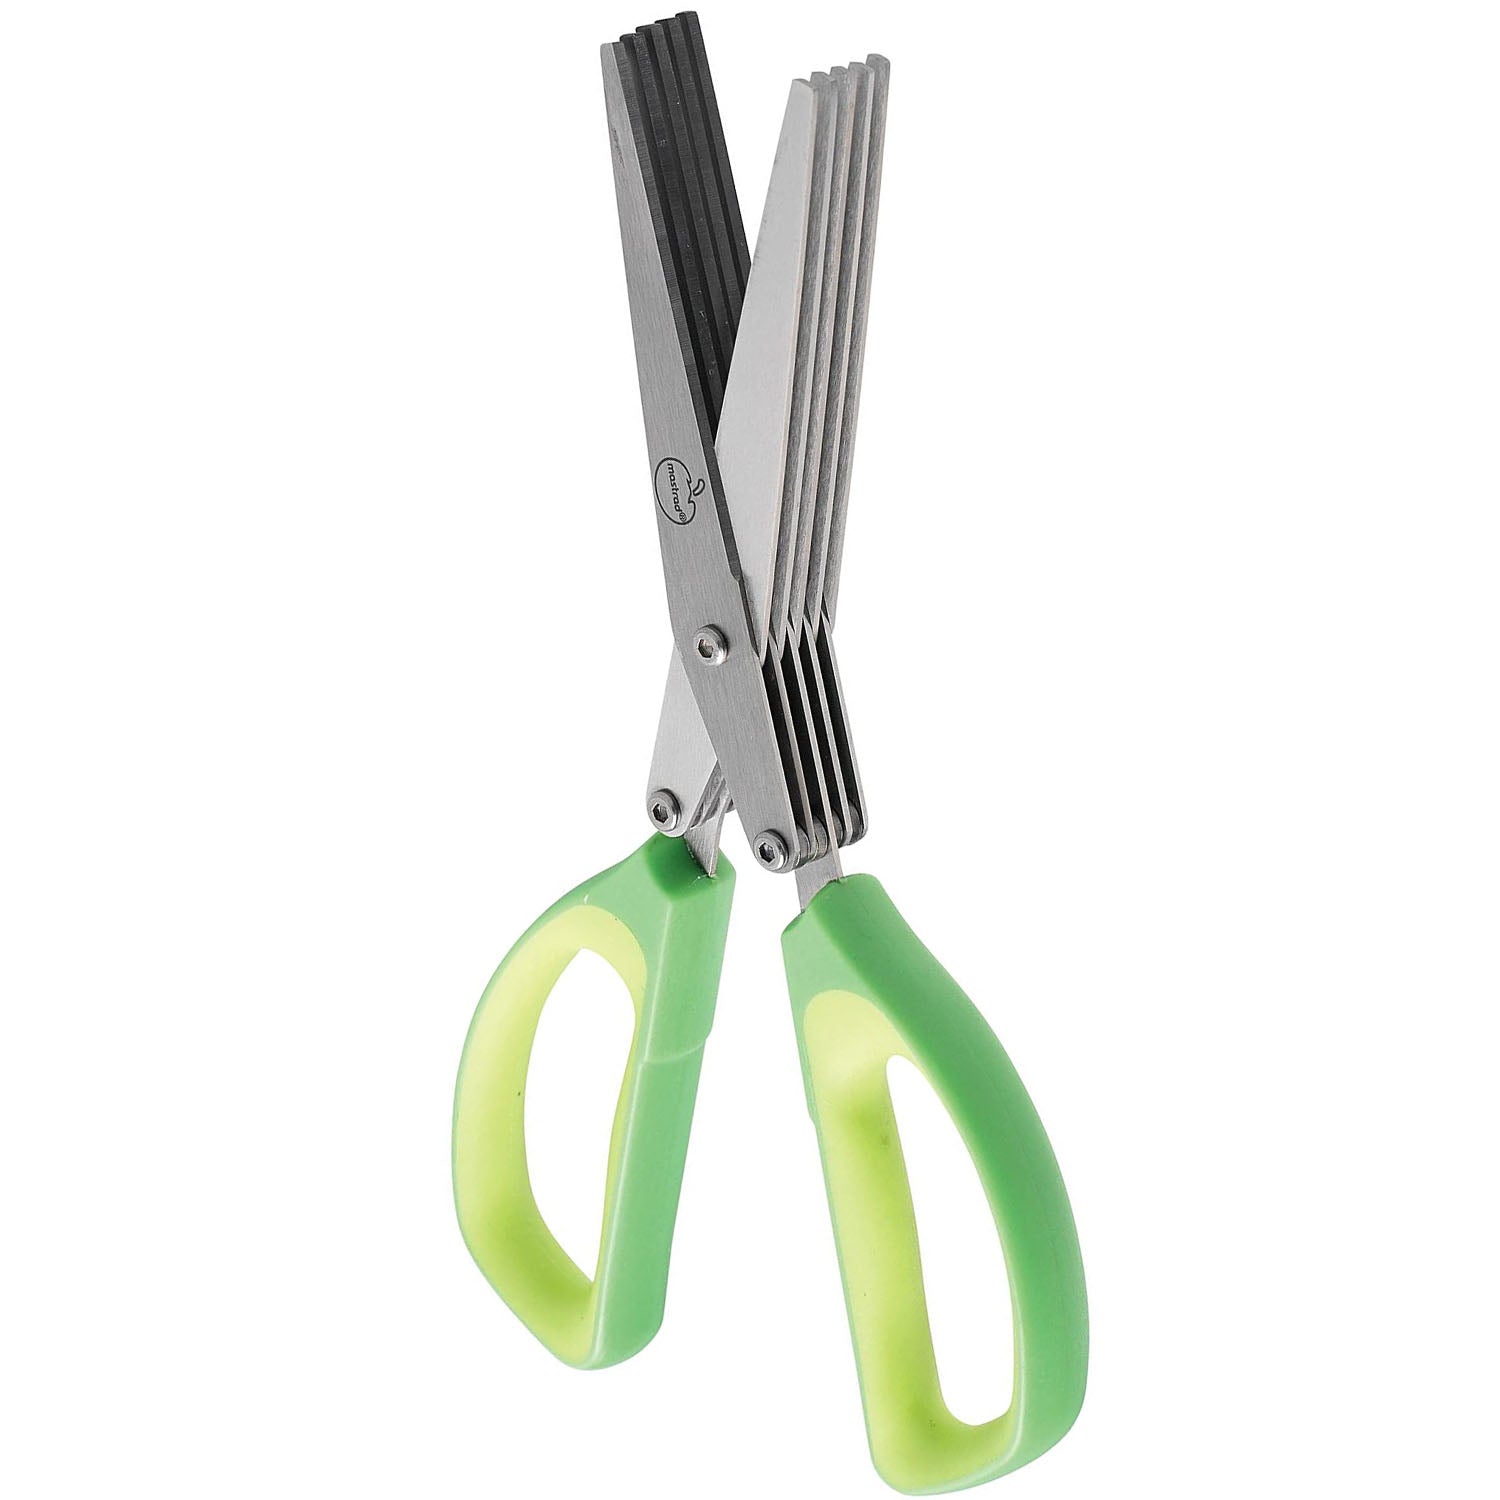  Herb Scissors, Kitchen Herb Shears Cutter with 5